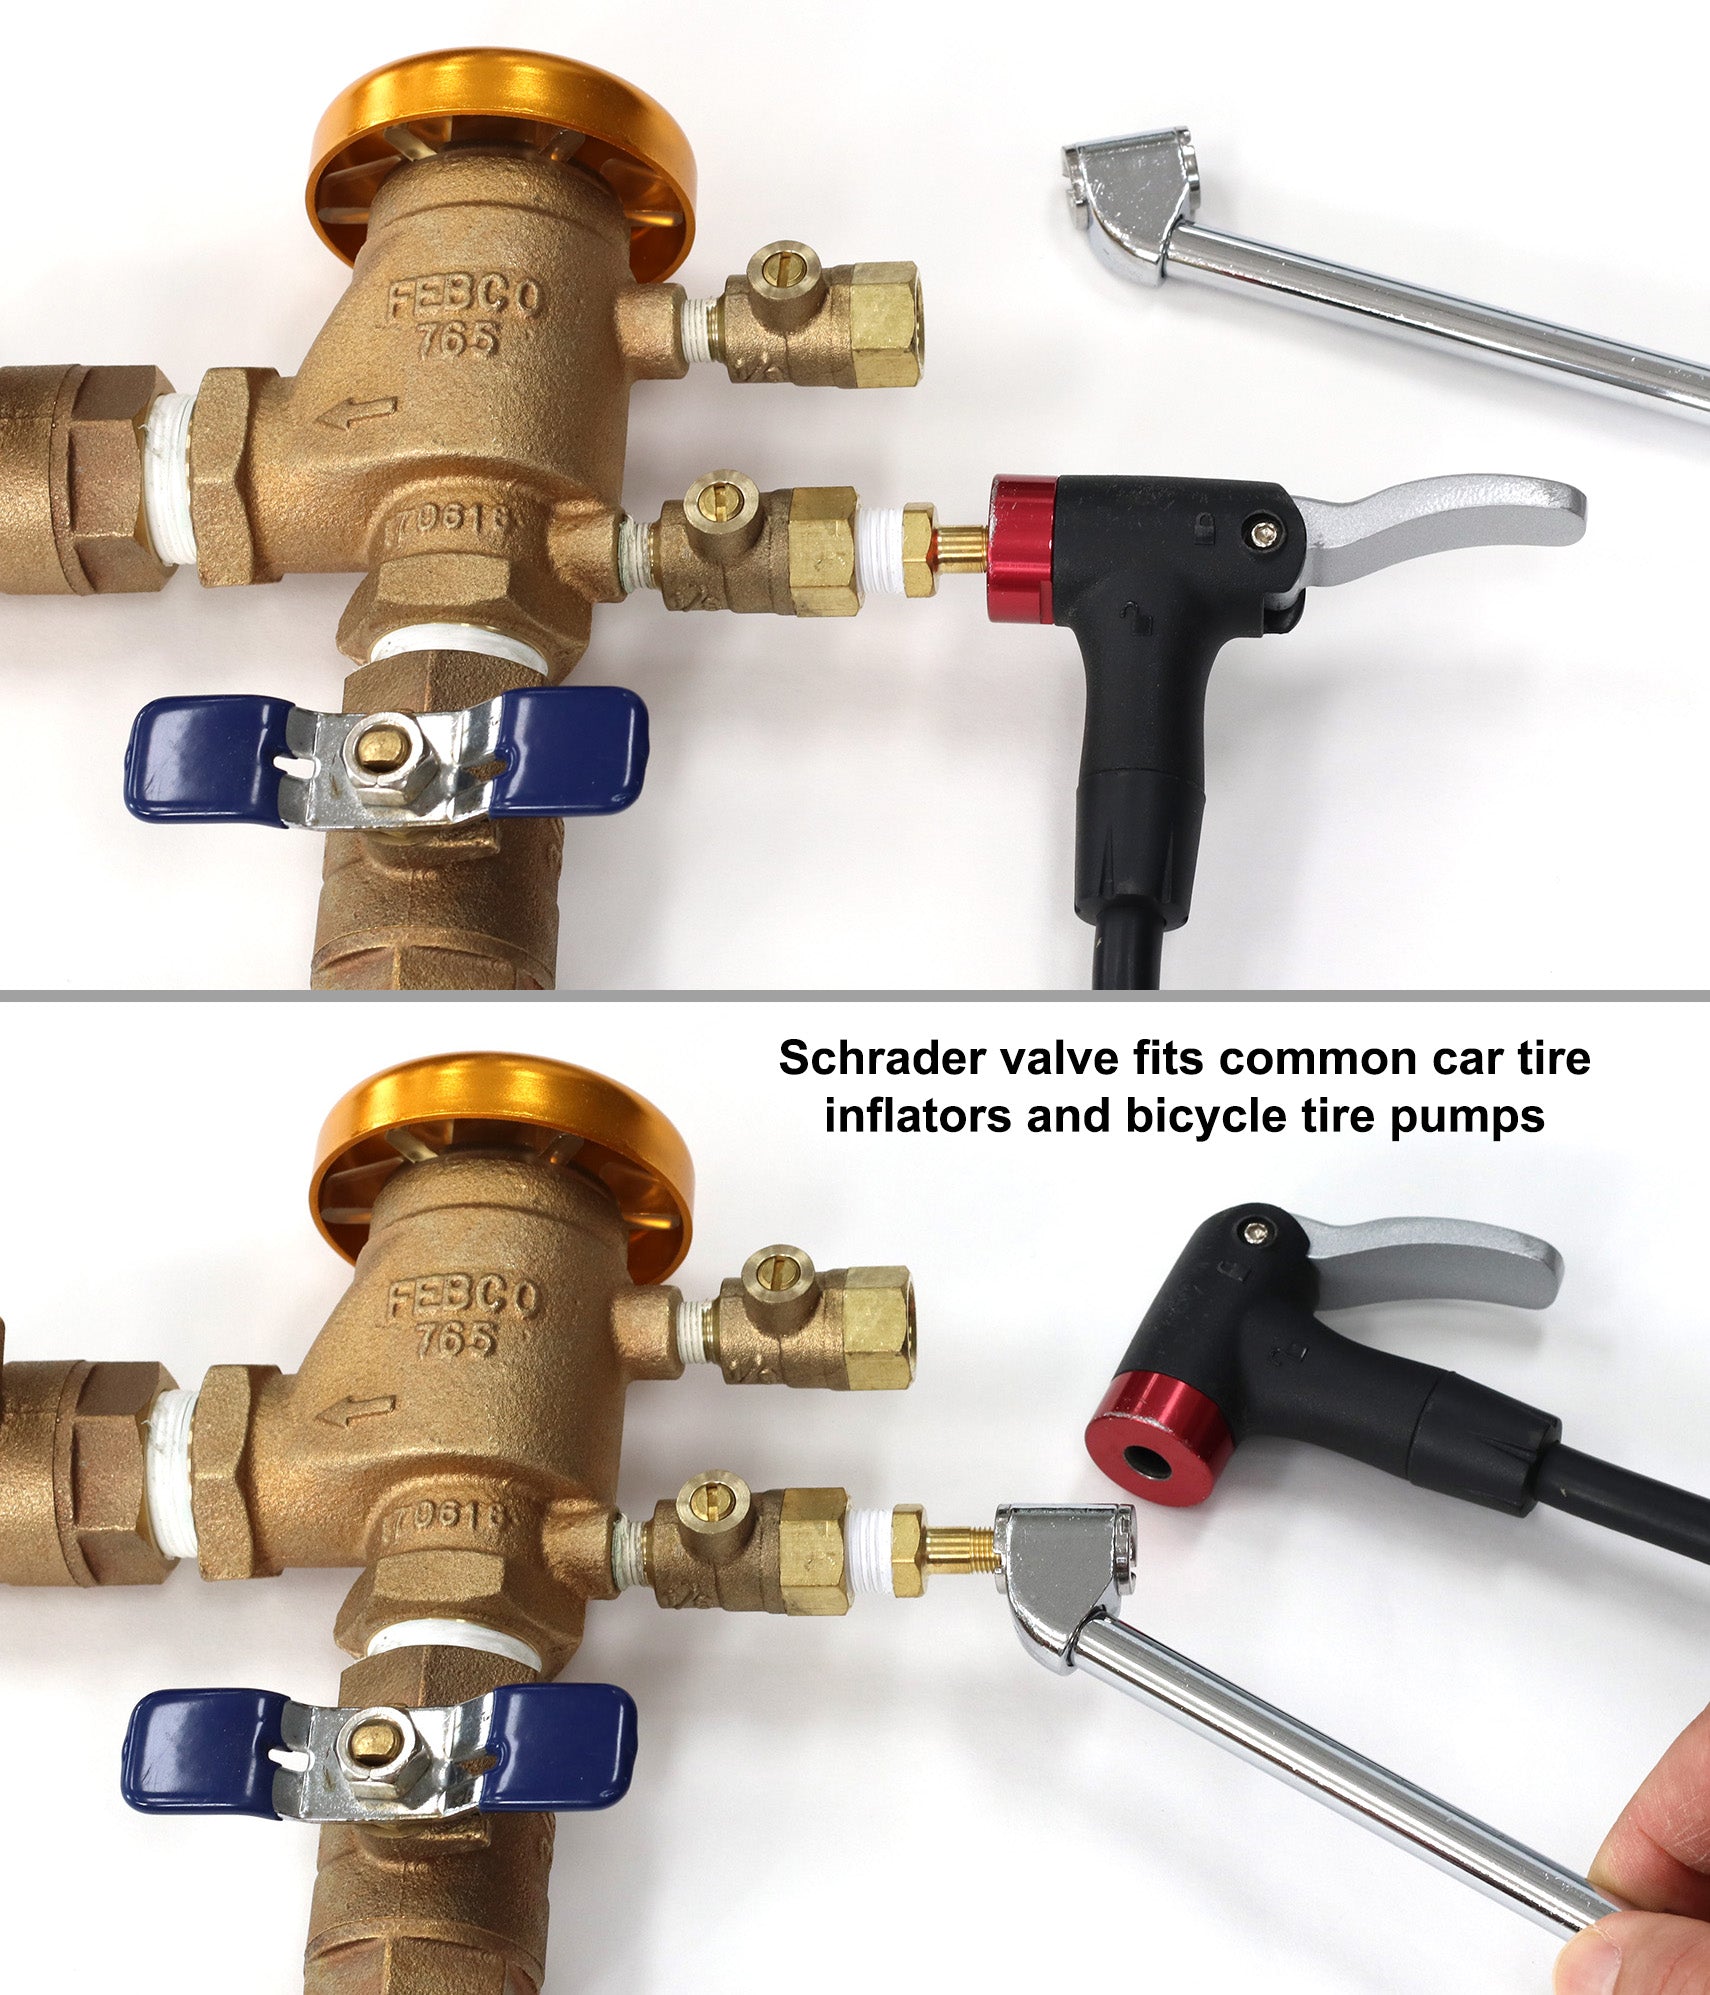 Schrader Valve to Male NPT Fittings | Adapters to Winterize Backflow Preventer and Pressure Vacuum Breaker (PVB) for Sprinkler Systems| Blowout Method Using Air Compressor (Lead-Free Brass)